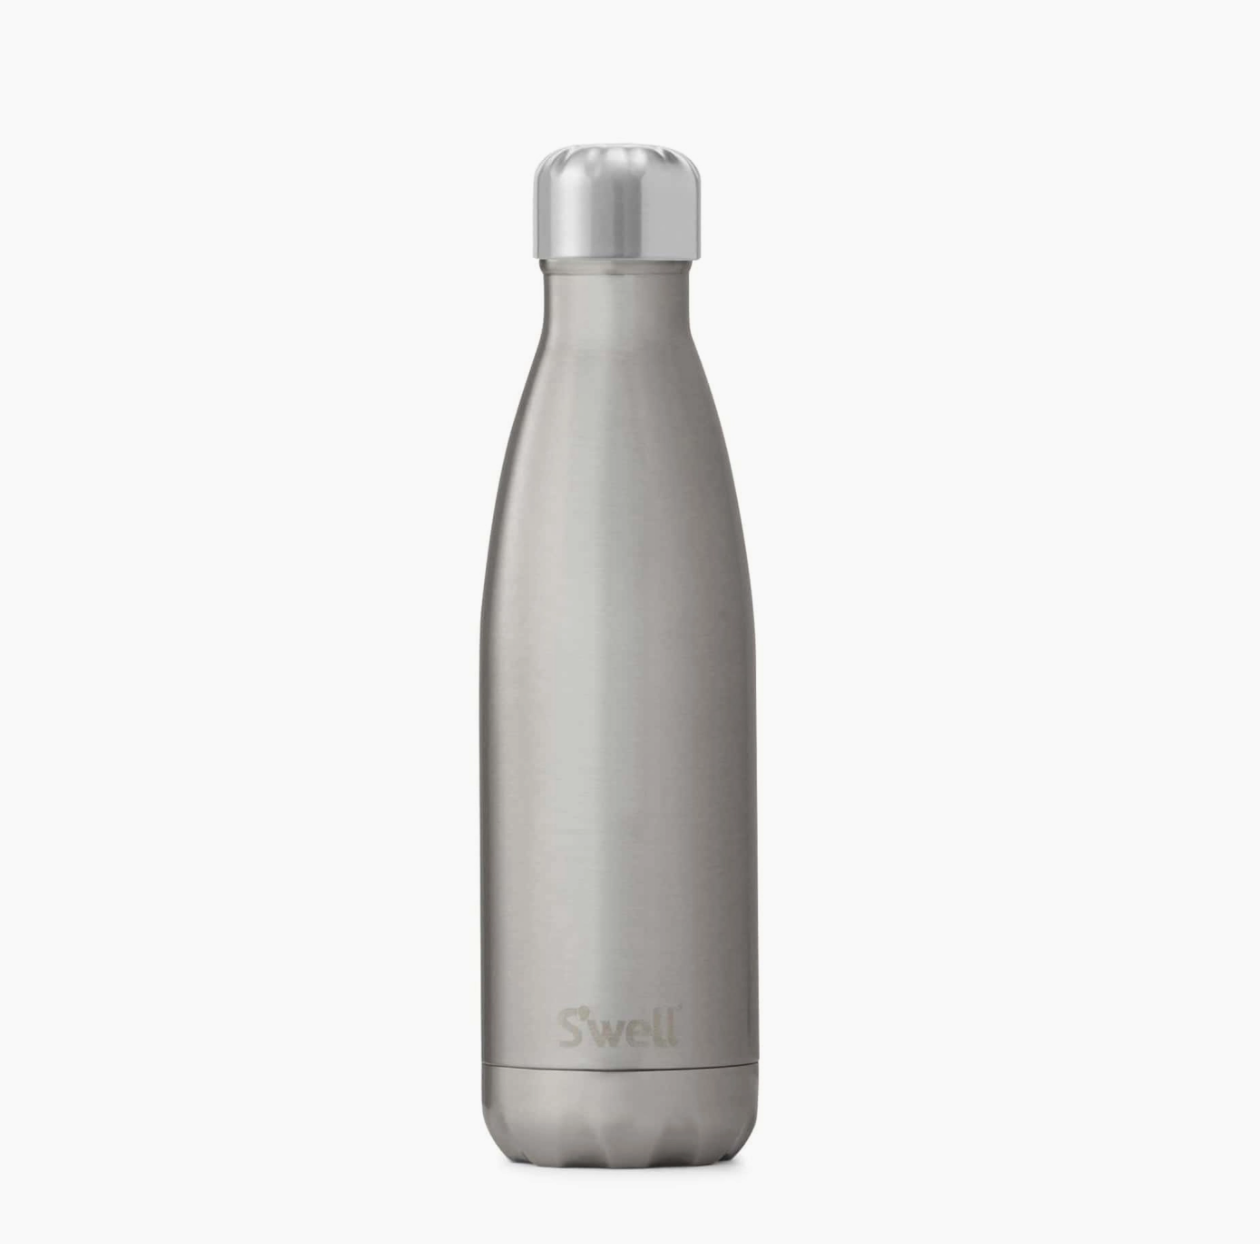 Stainless Steel Water Bottle - Silver Lining - 17oz